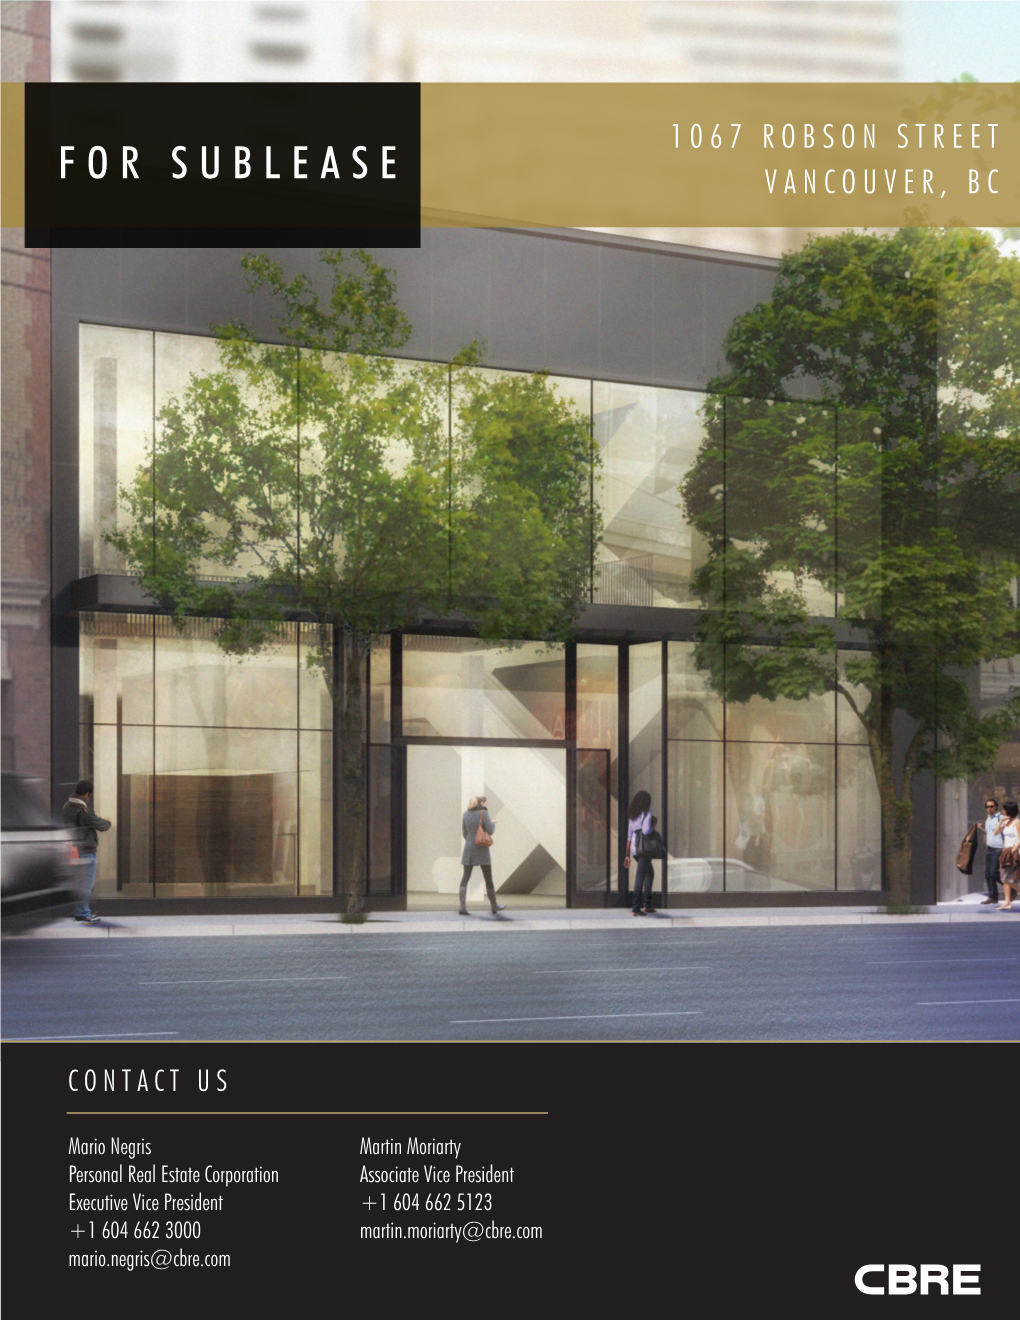 For Sublease Vancouver, Bc